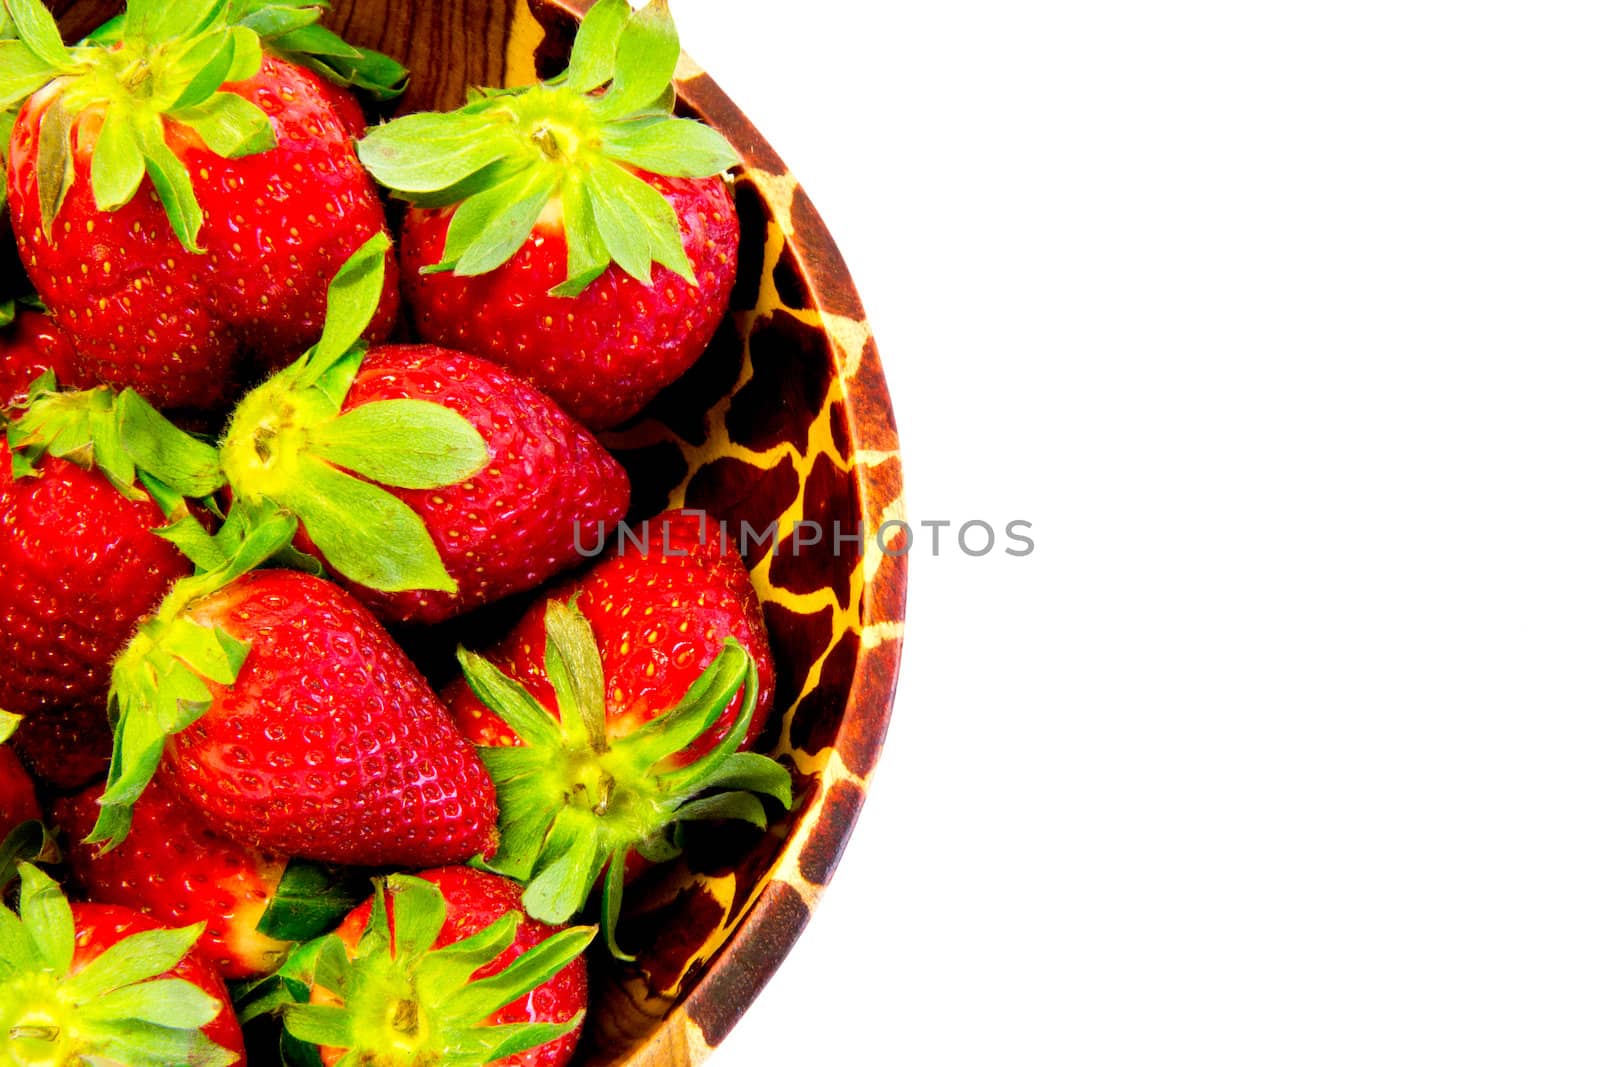 bowl with strawberries isolated on white